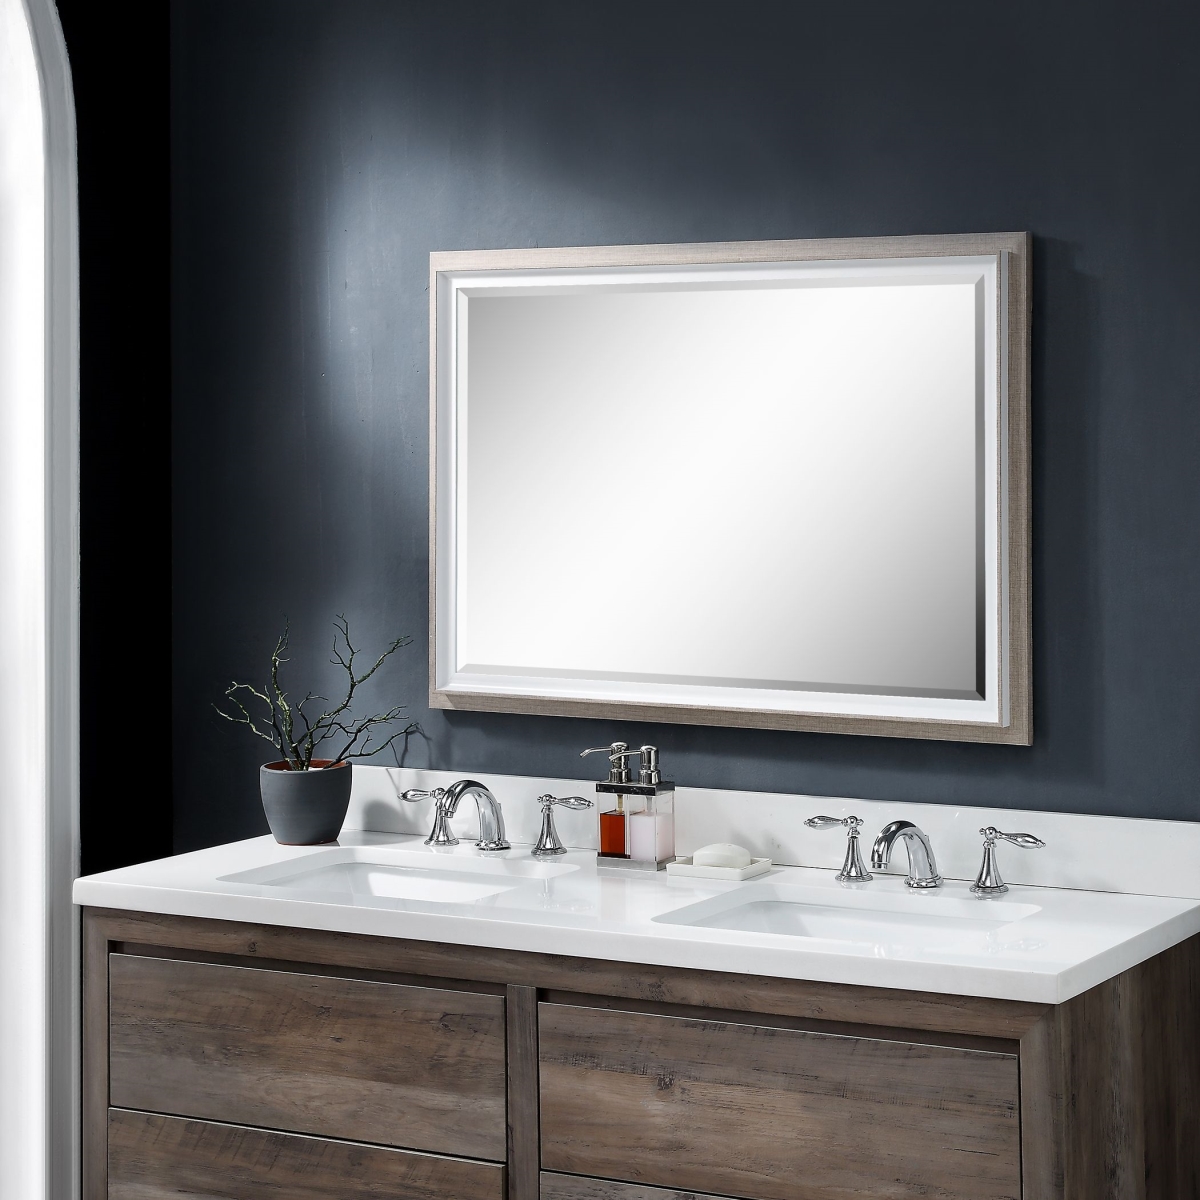 Picture of 212 Main 09603 35.125 x 46.125 x 6 in. Mitra Rectangular Mirror